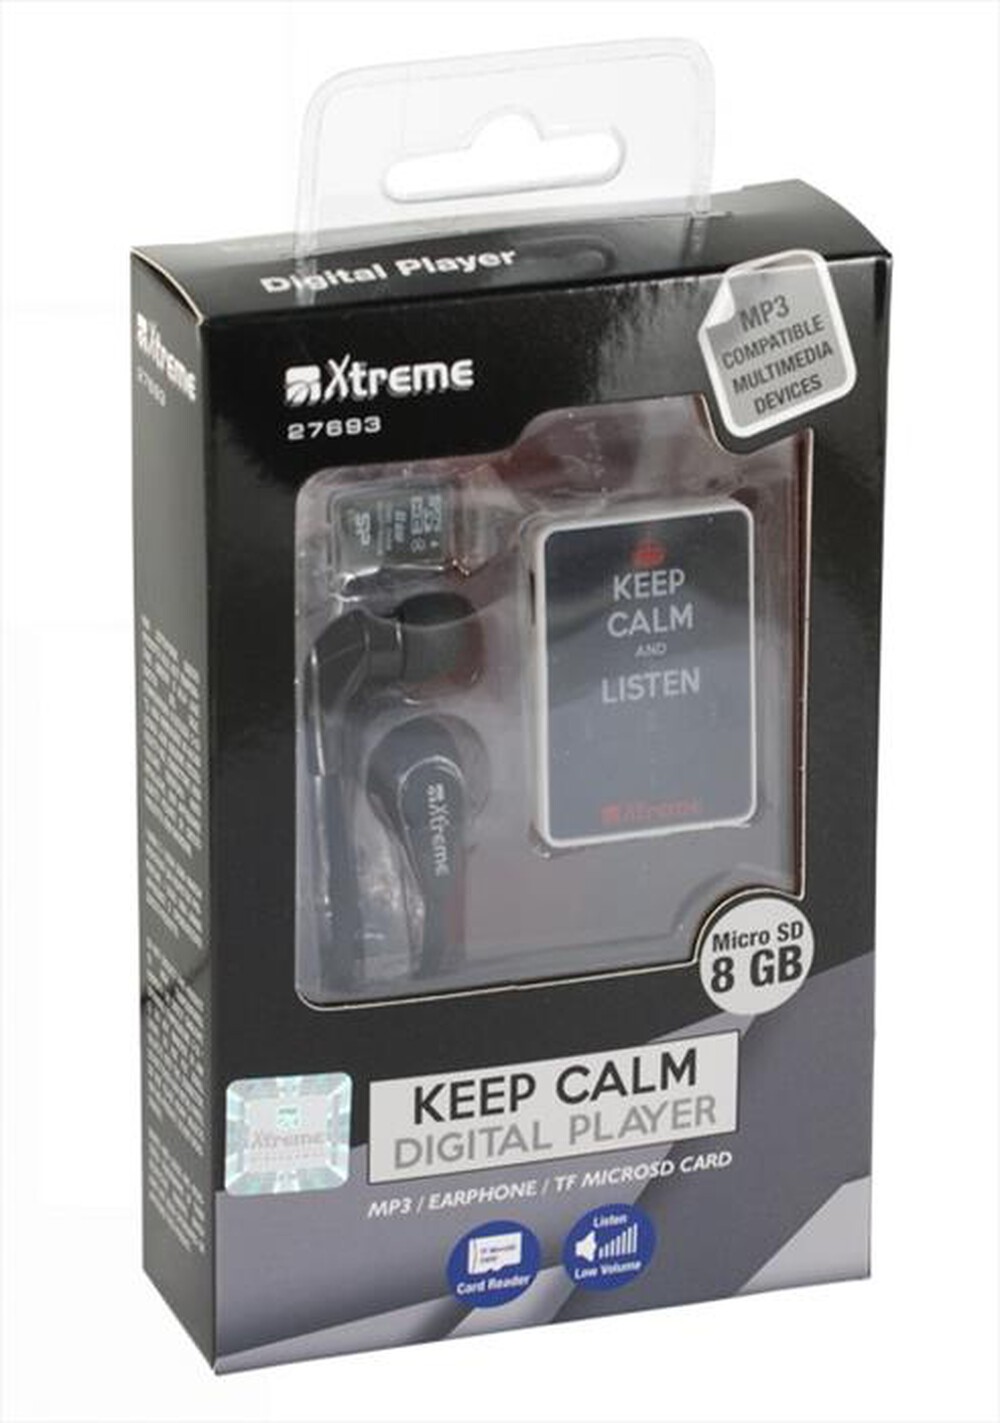 "XTREME - 27693 - Lettore file KEEP CALM - "